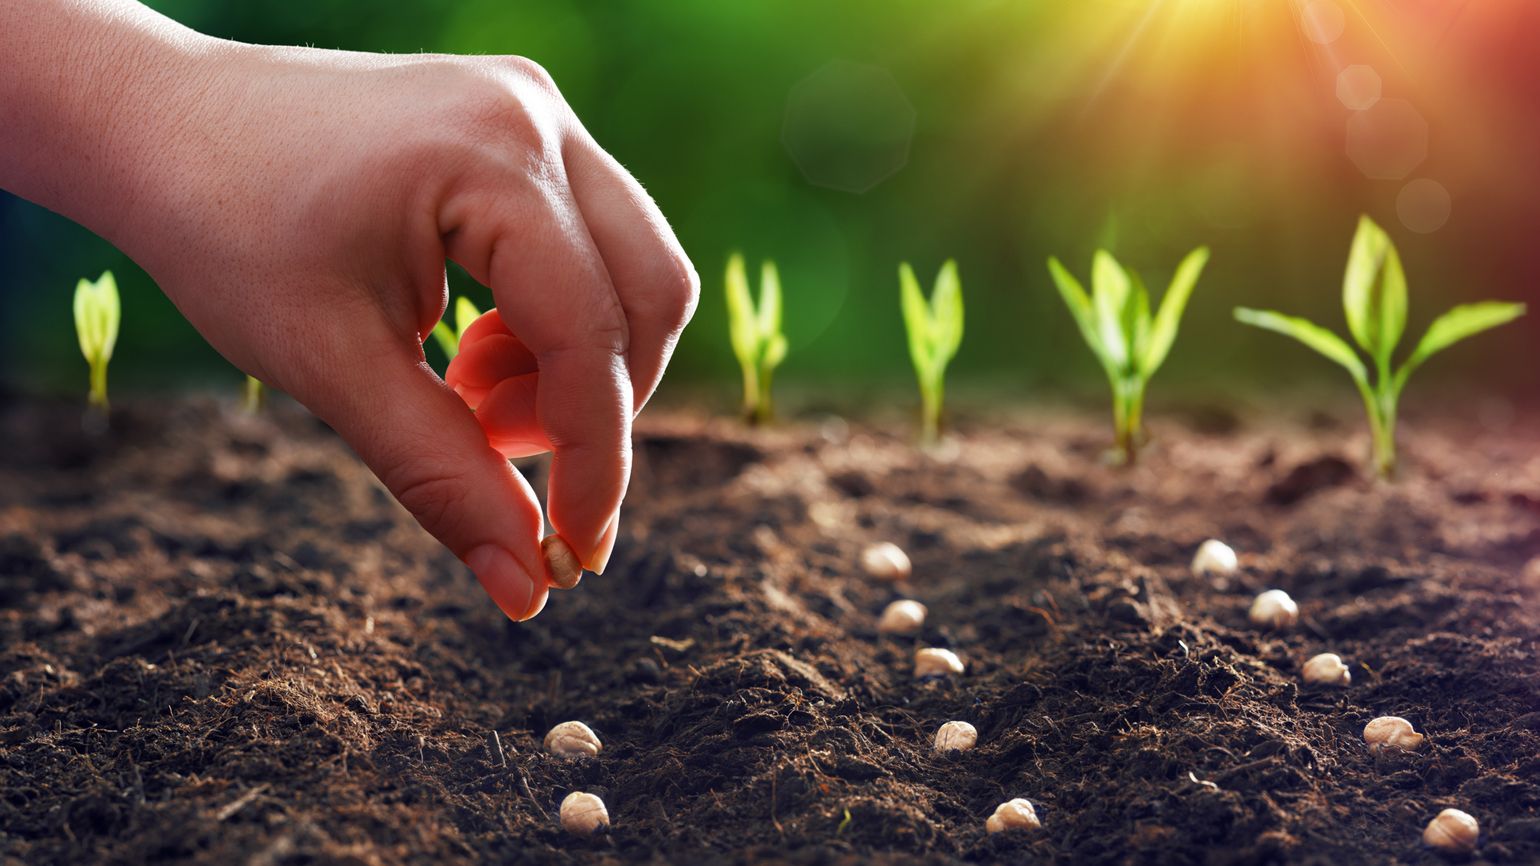 Planting seeds; Getty Images